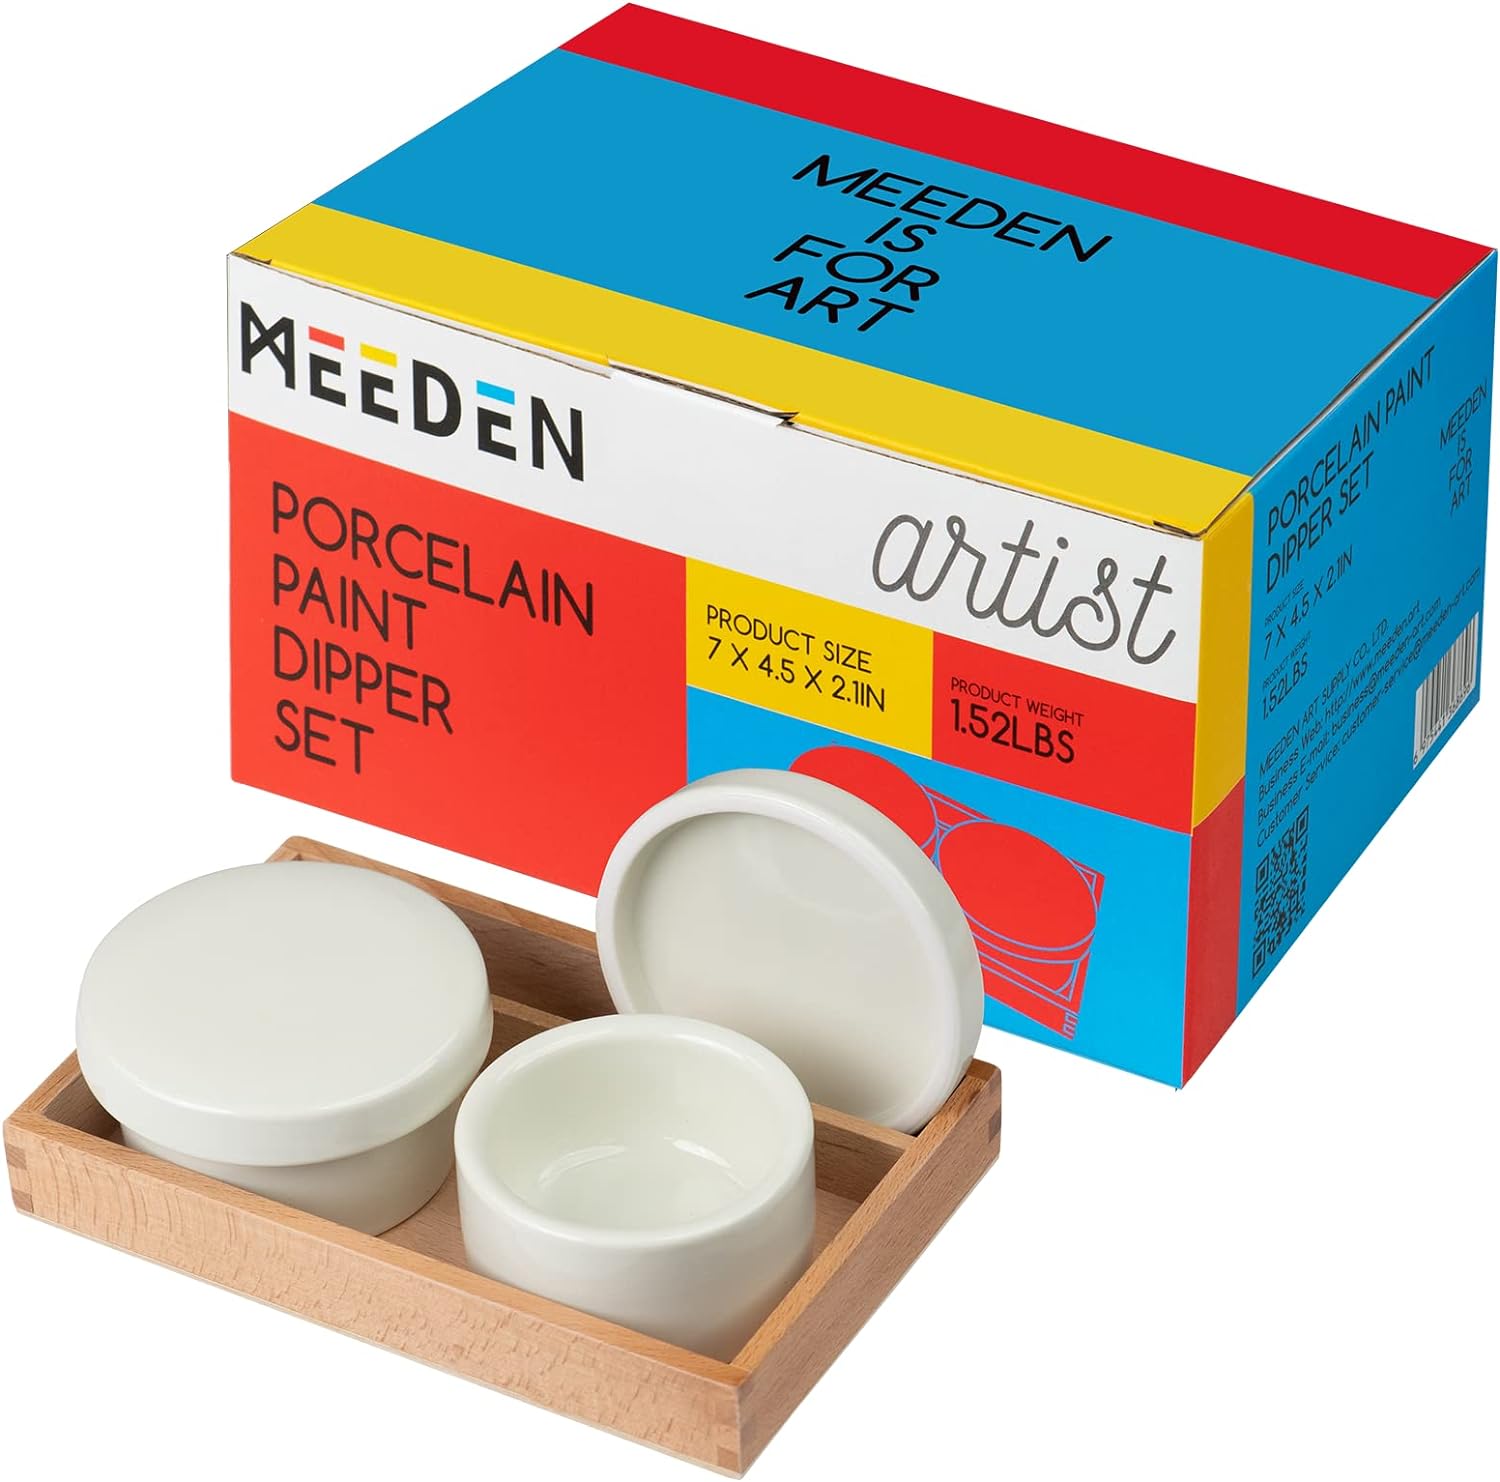 MEEDEN Ceramic Double Palette Cup with Cover